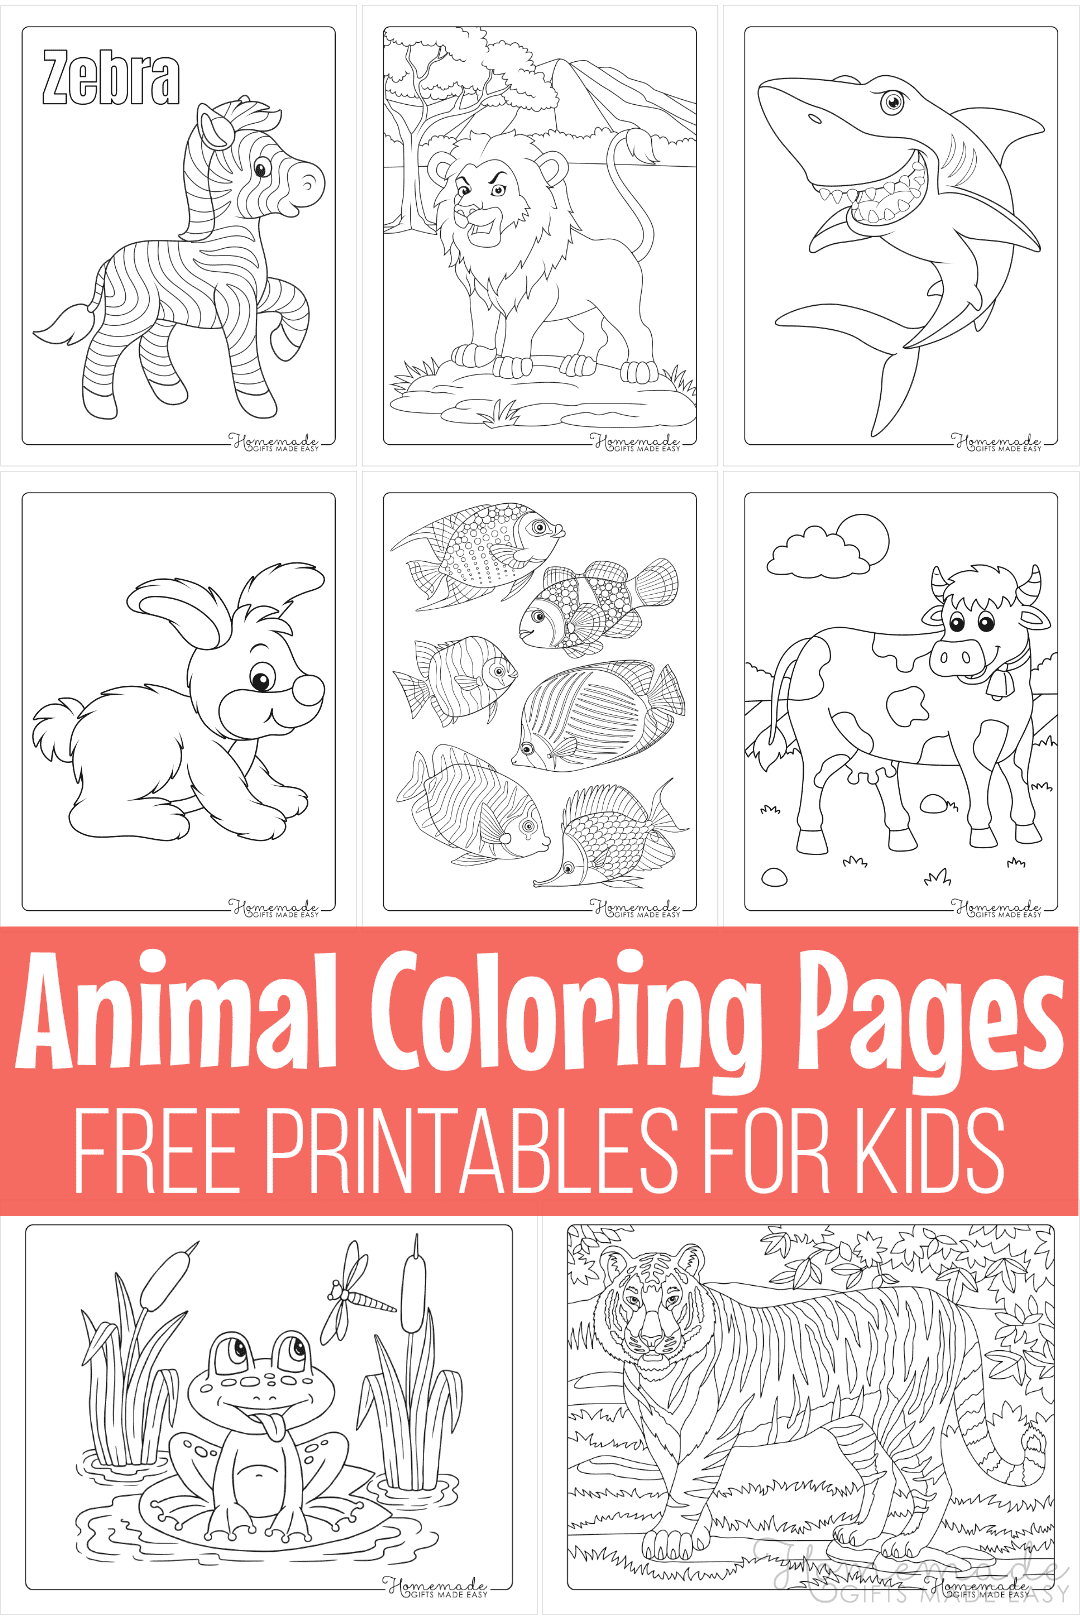 Free Animal Coloring Pages For Kids